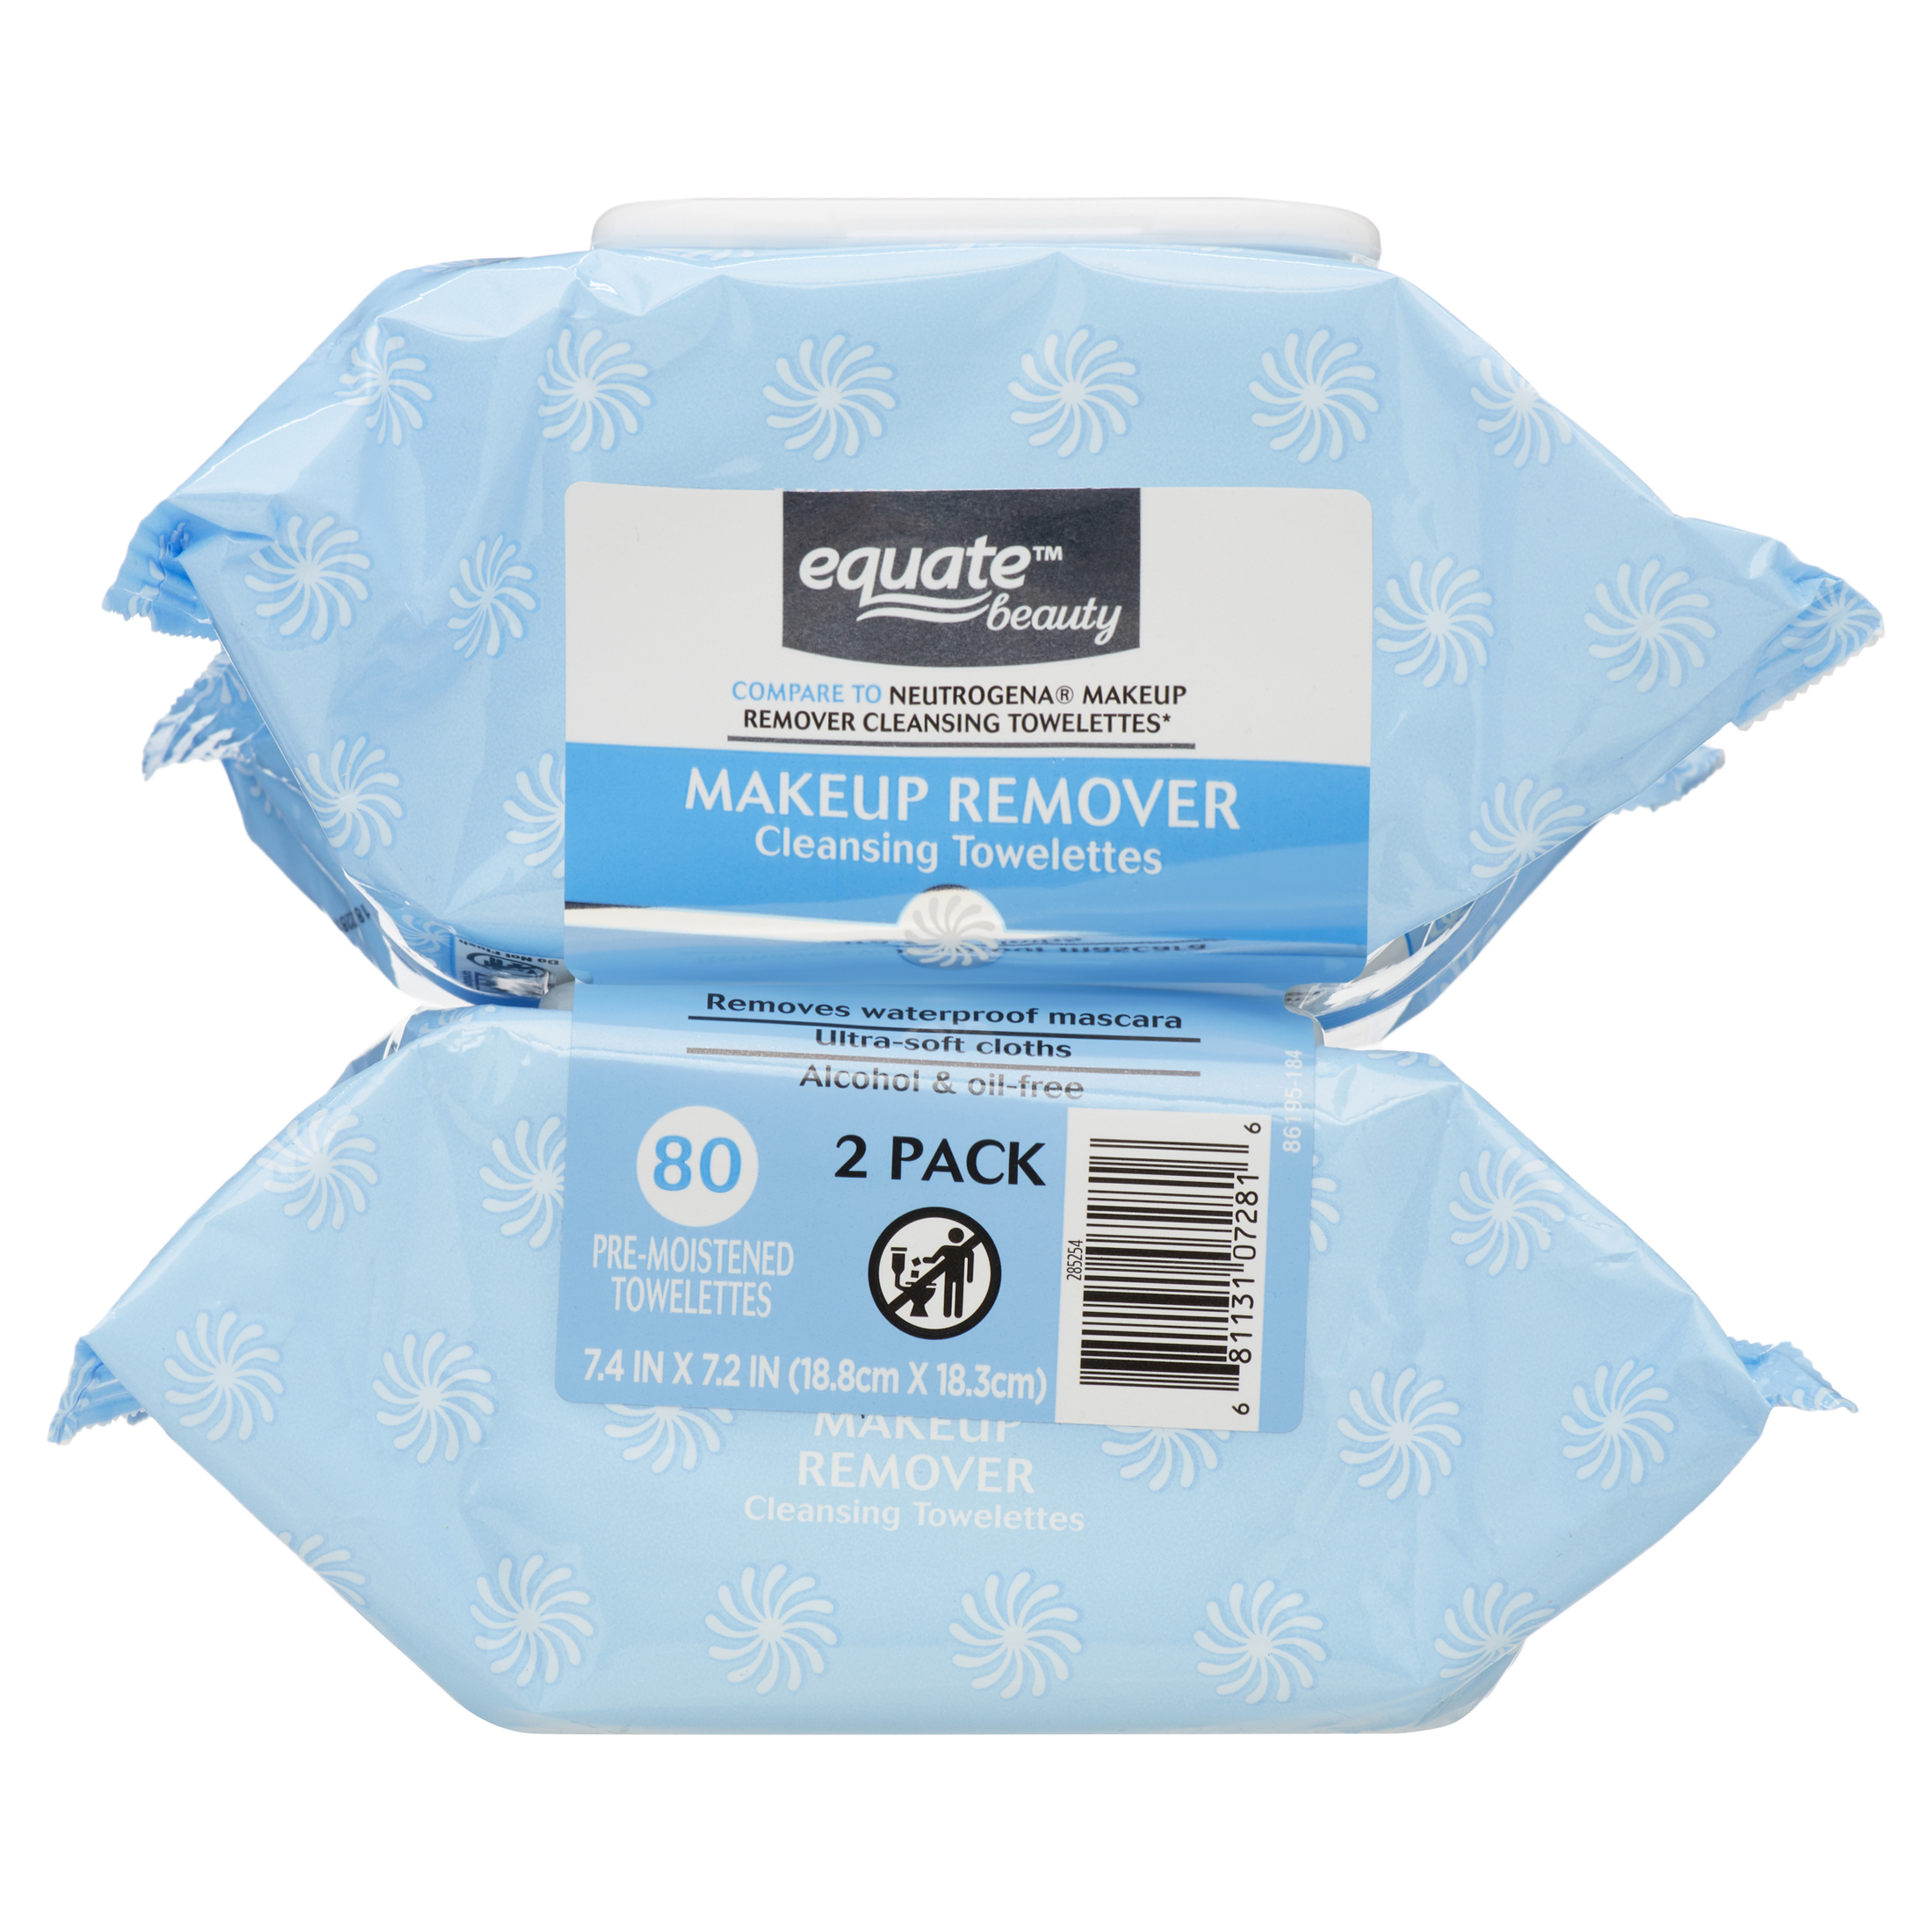 Equate Beauty Makeup Remover Cleansing Towelettes, 40 Count, 2 Pack - image 1 of 8